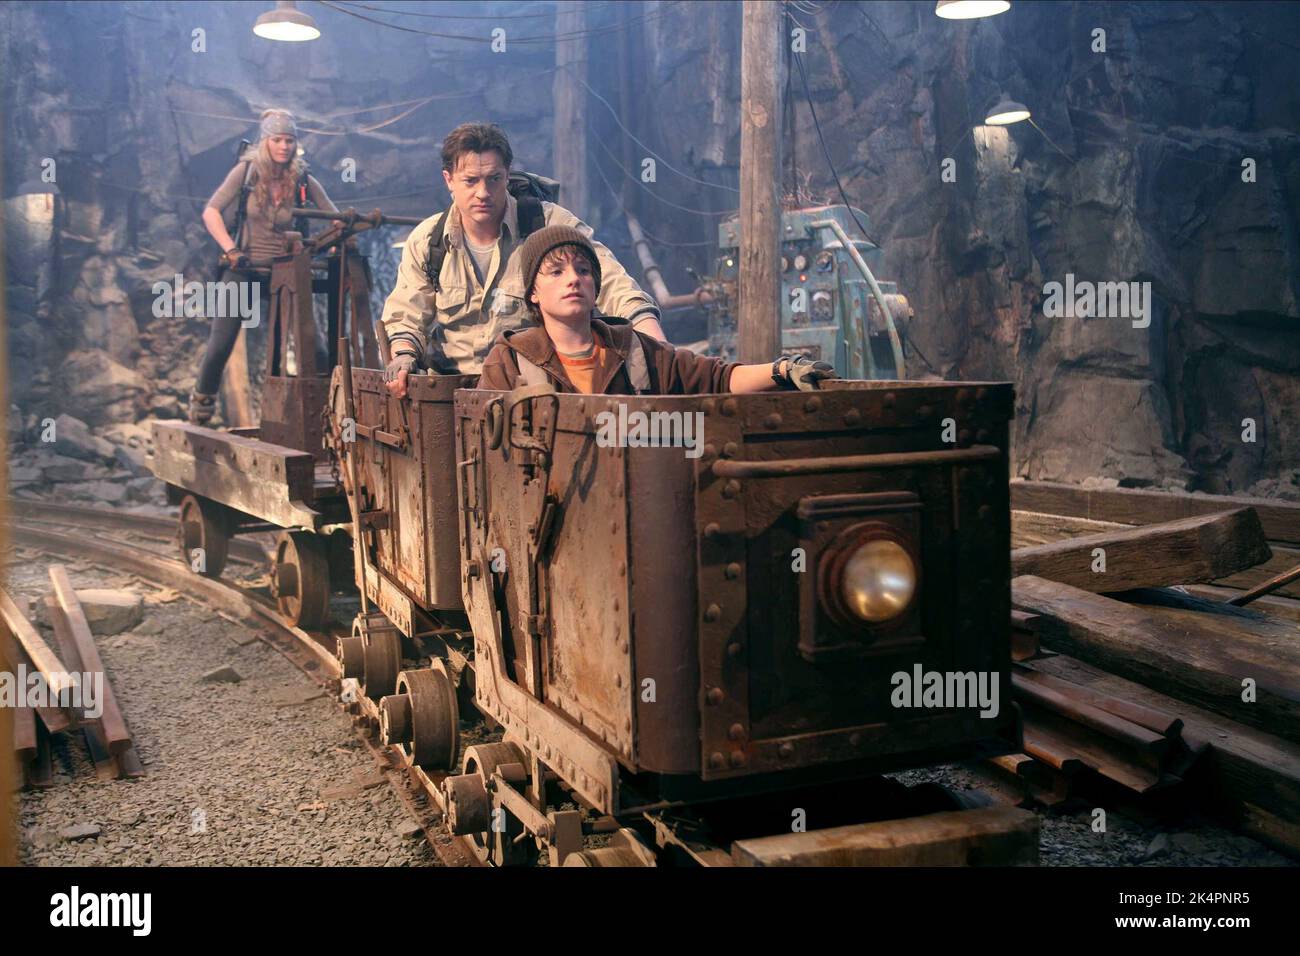 BRIEM,FRASER,HUTCHERSON, JOURNEY TO THE CENTER OF THE EARTH, 2008 Stock Photo